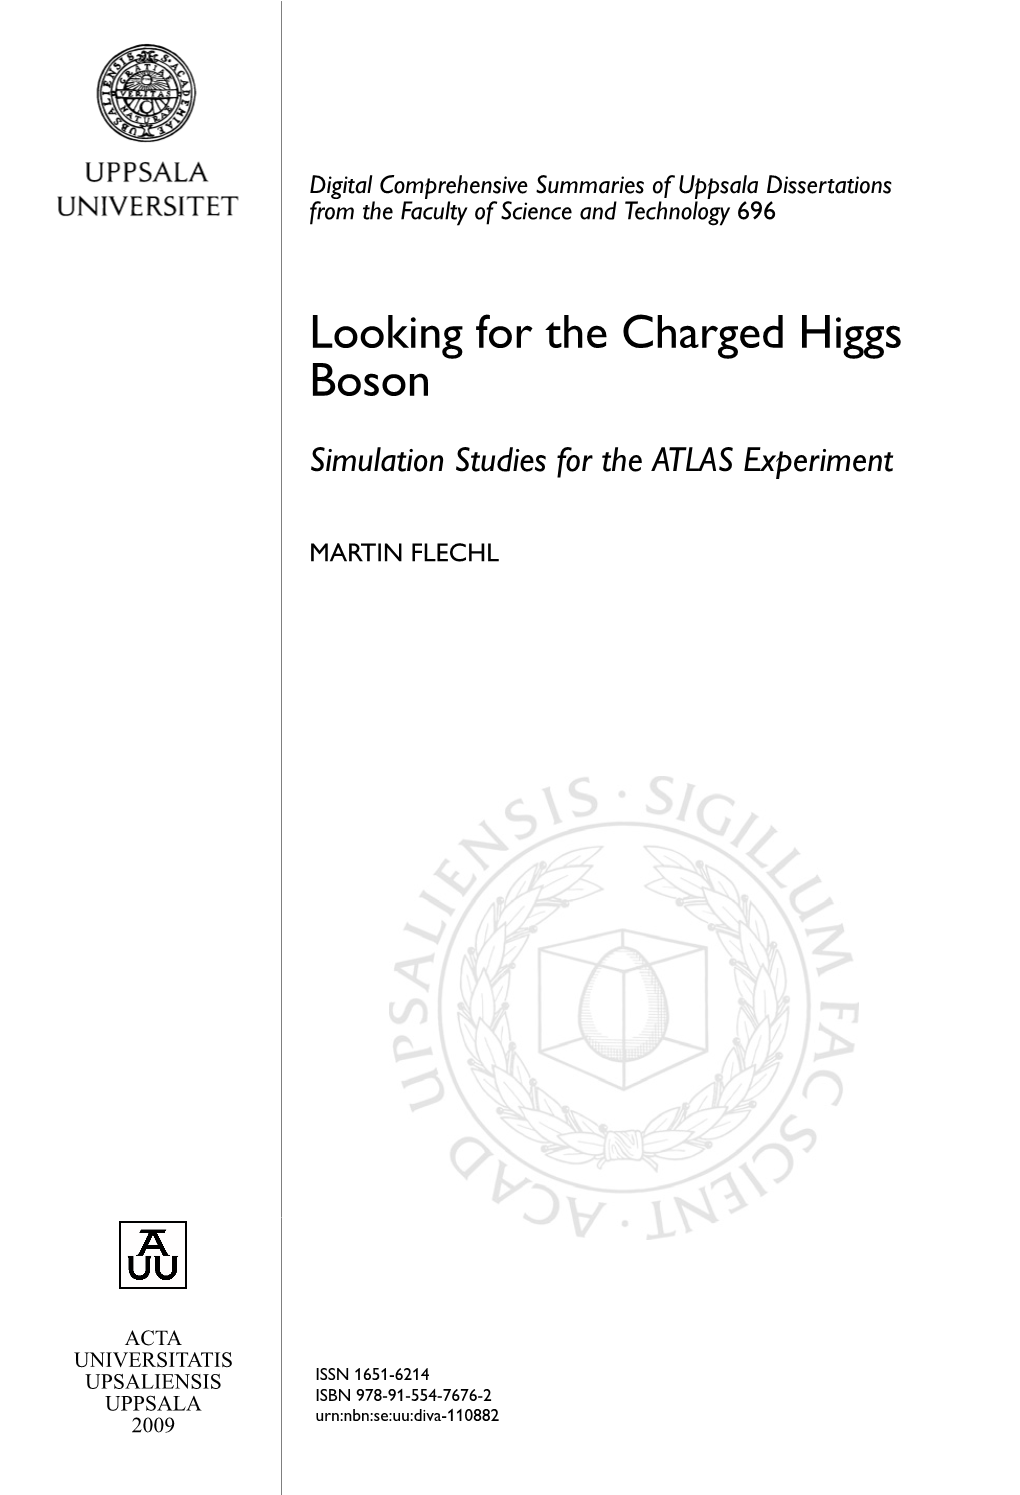 Looking for the Charged Higgs Boson: Simulation